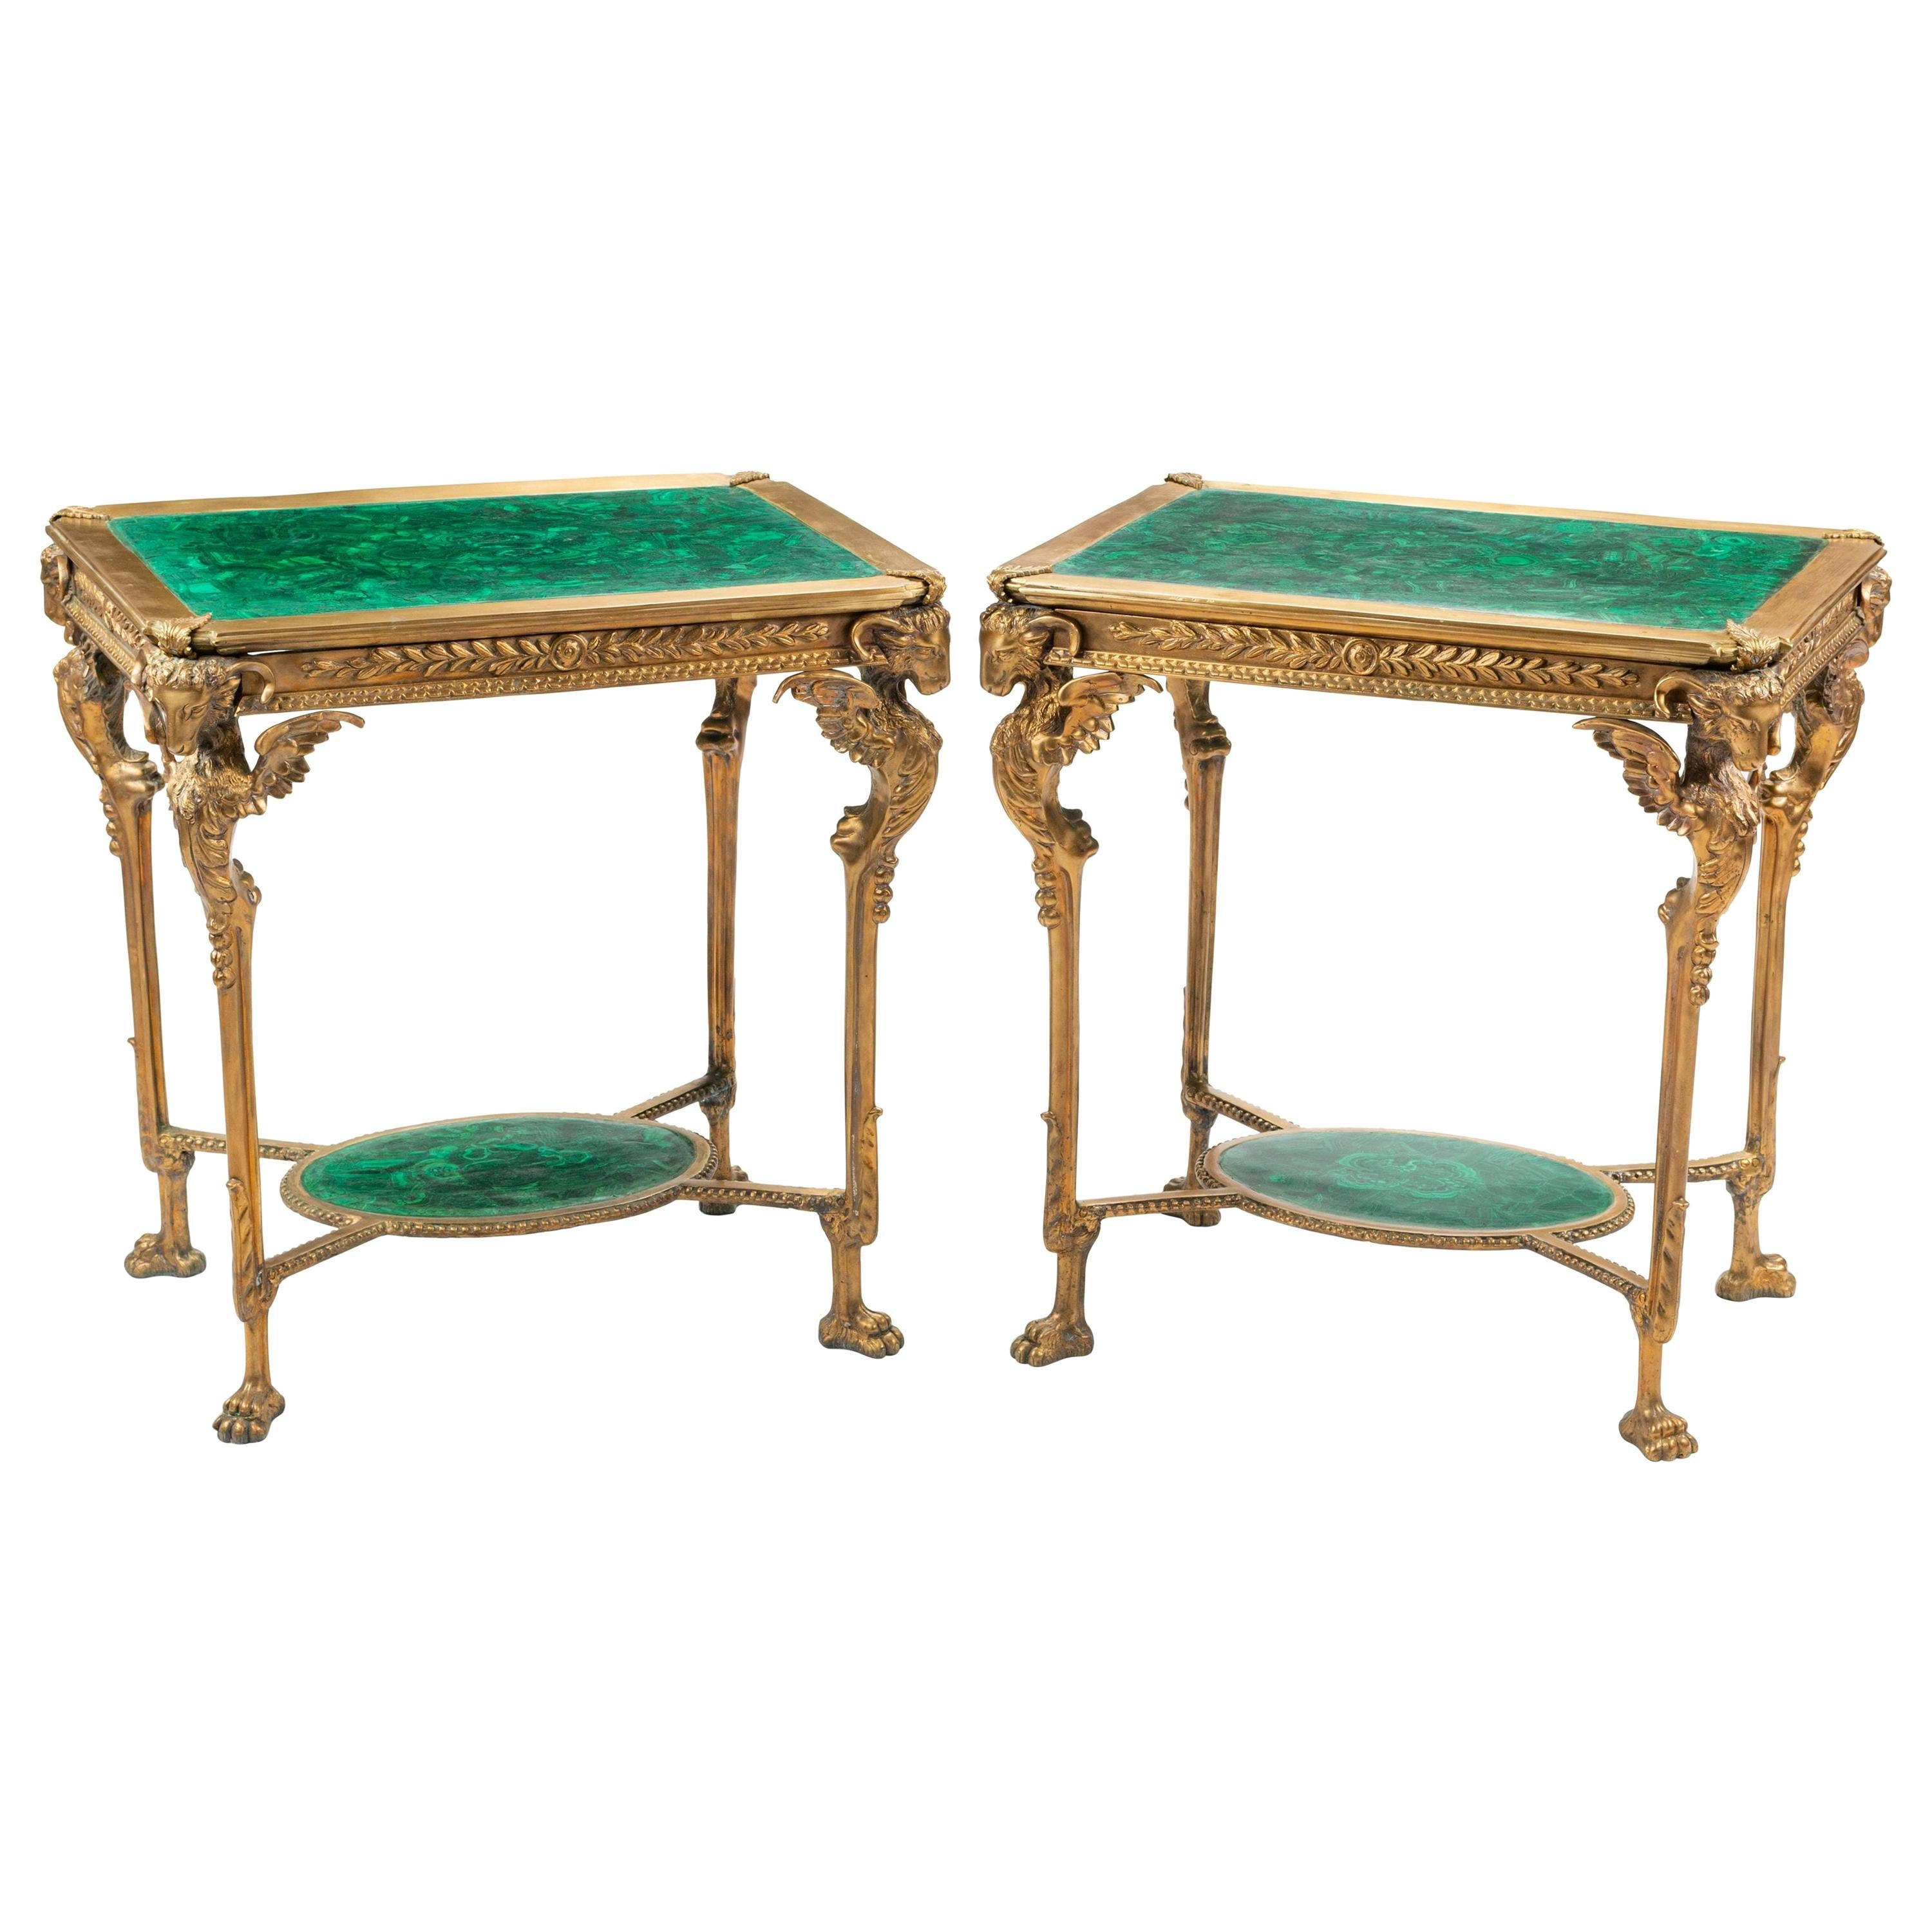 Early 20th Century Empire Malachite and Gilt Bronze Tables For Sale